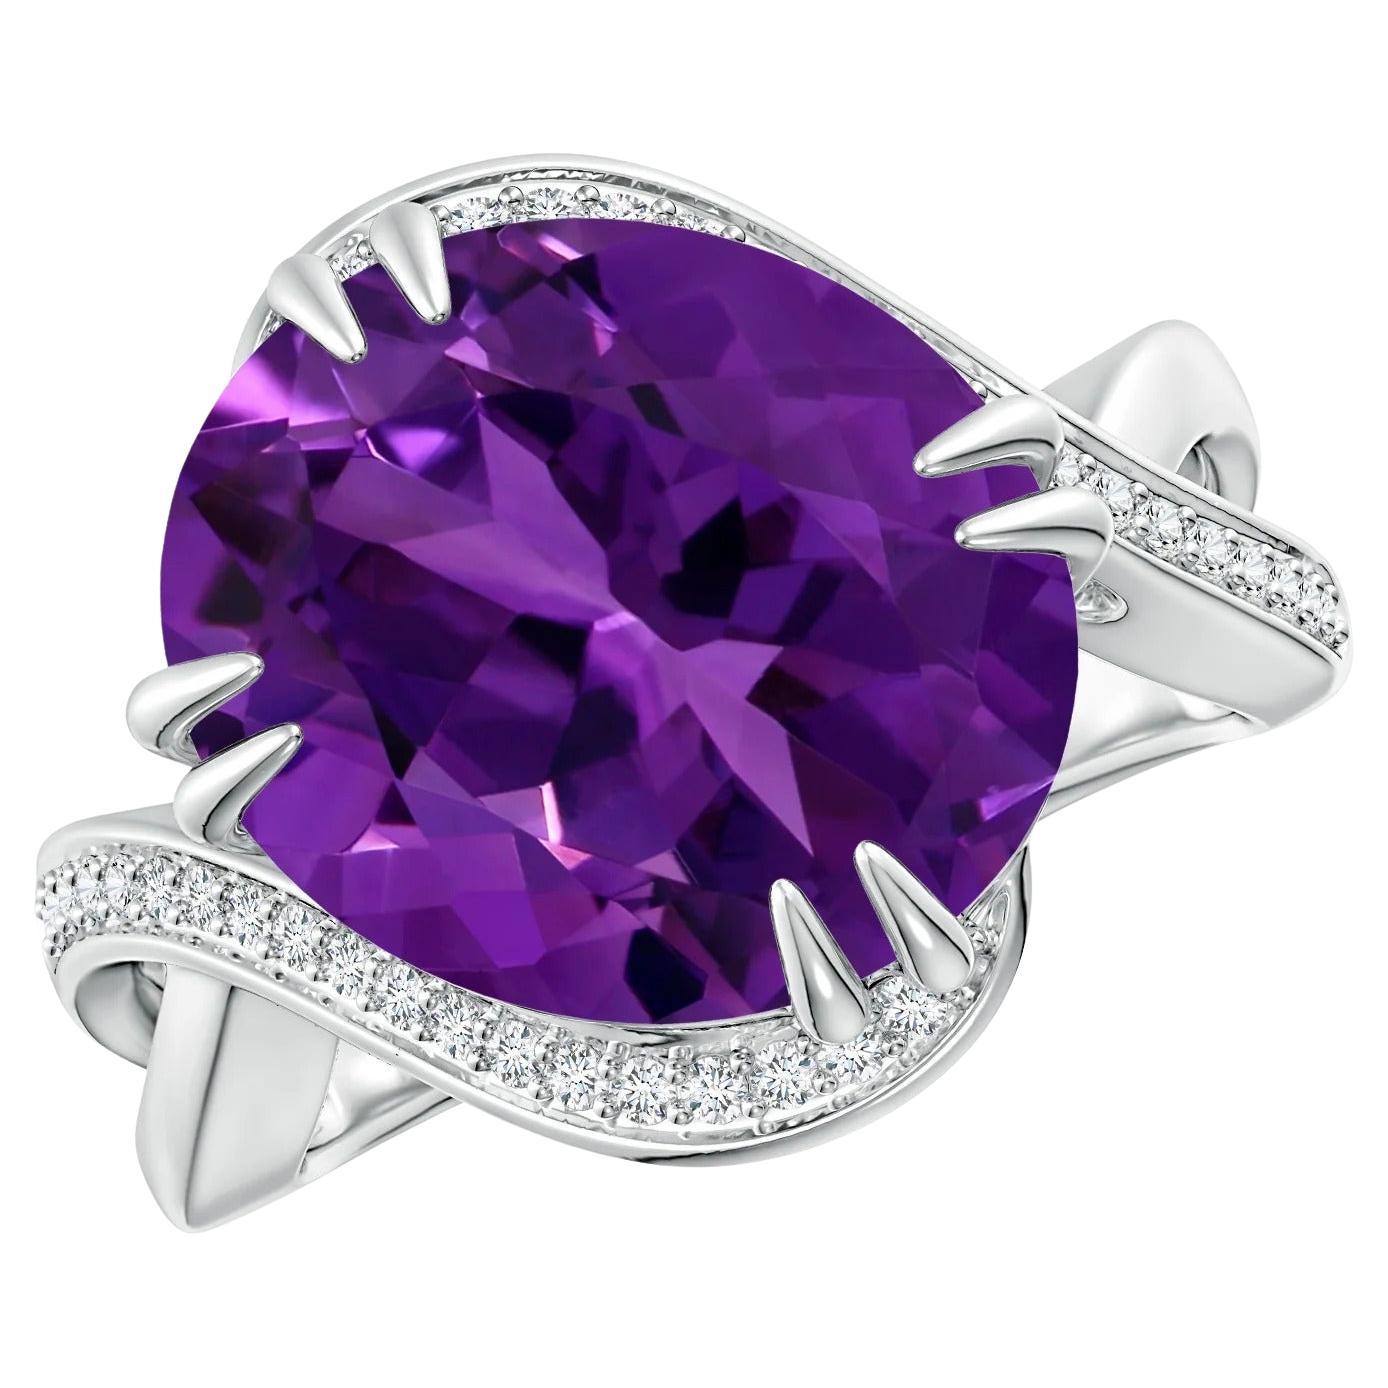 For Sale:  Angara GIA Certified Natural Amethyst Bypass White Gold Ring with Diamonds